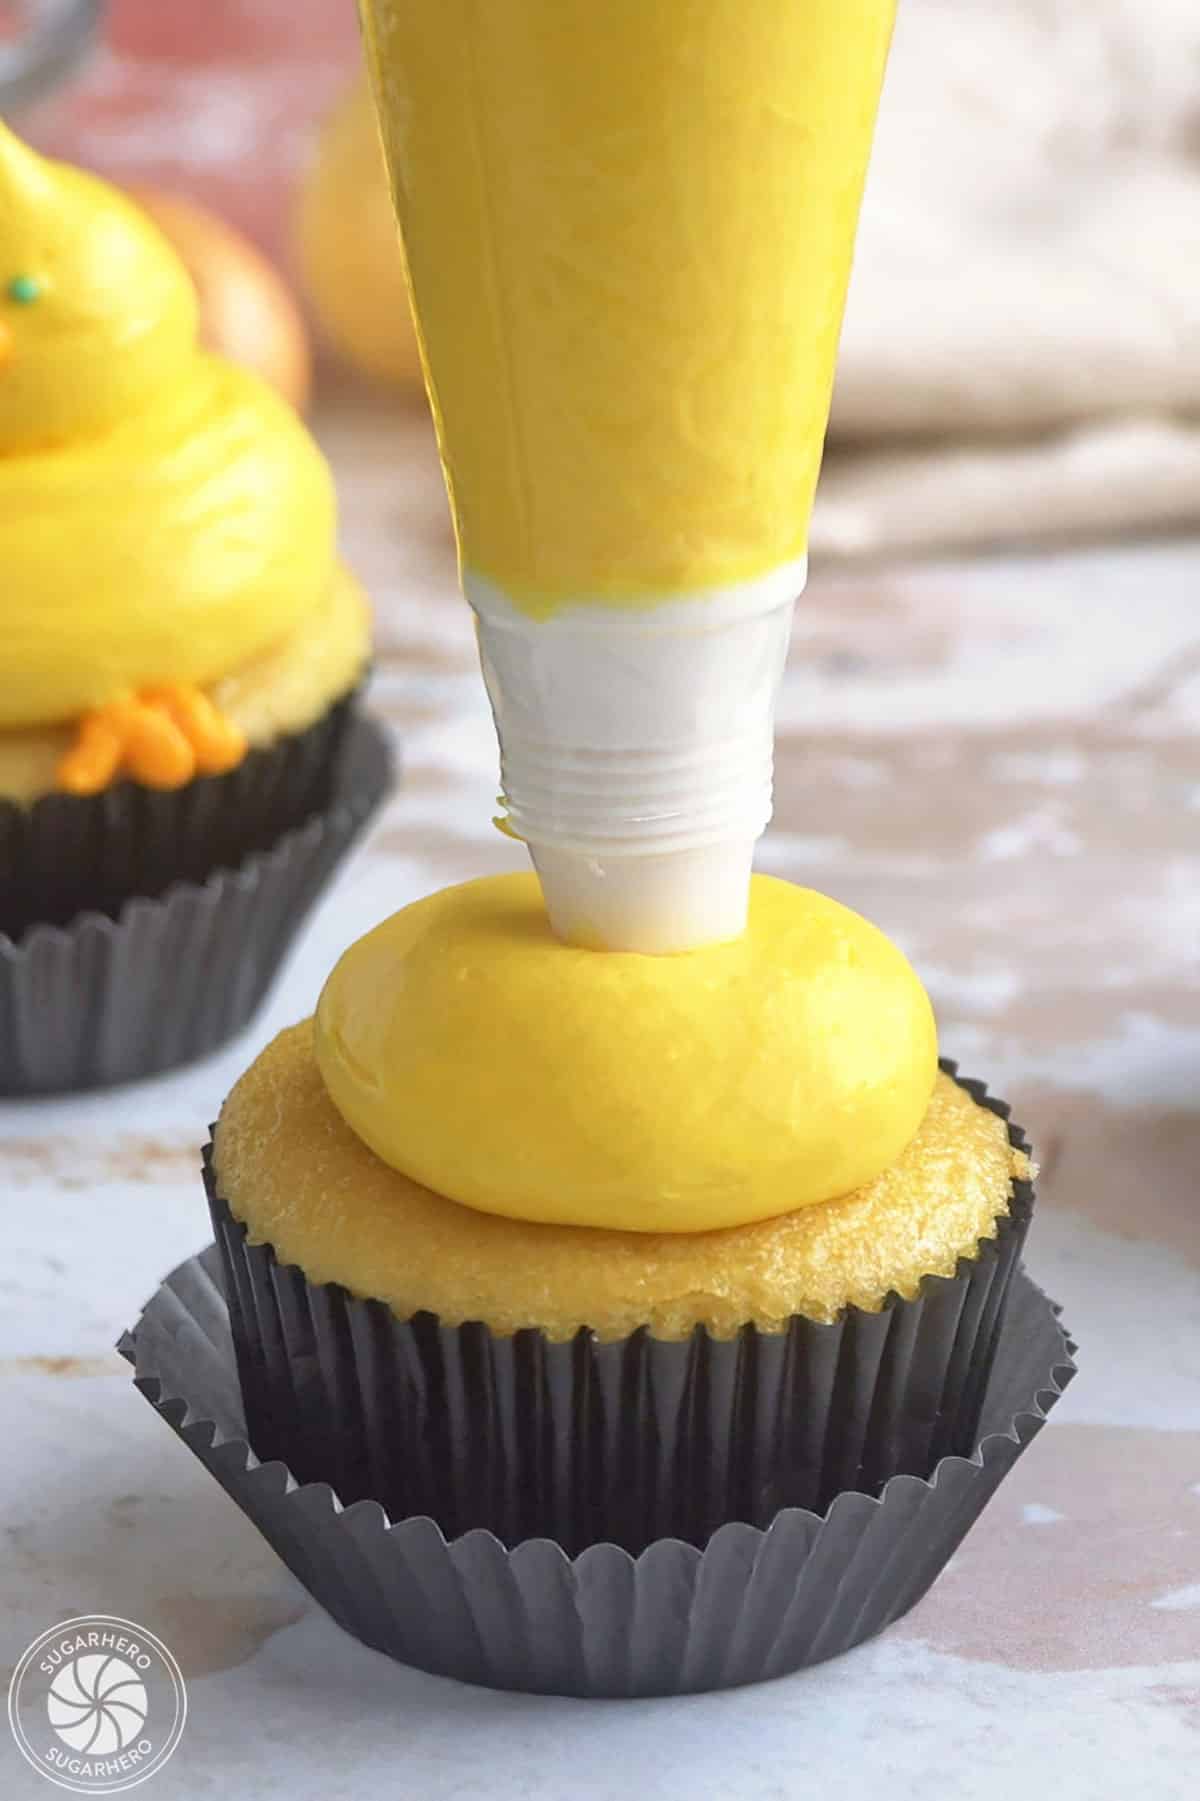 Adding a large buttercream dollop on top of a cupcake to make baby chick cupcakes.